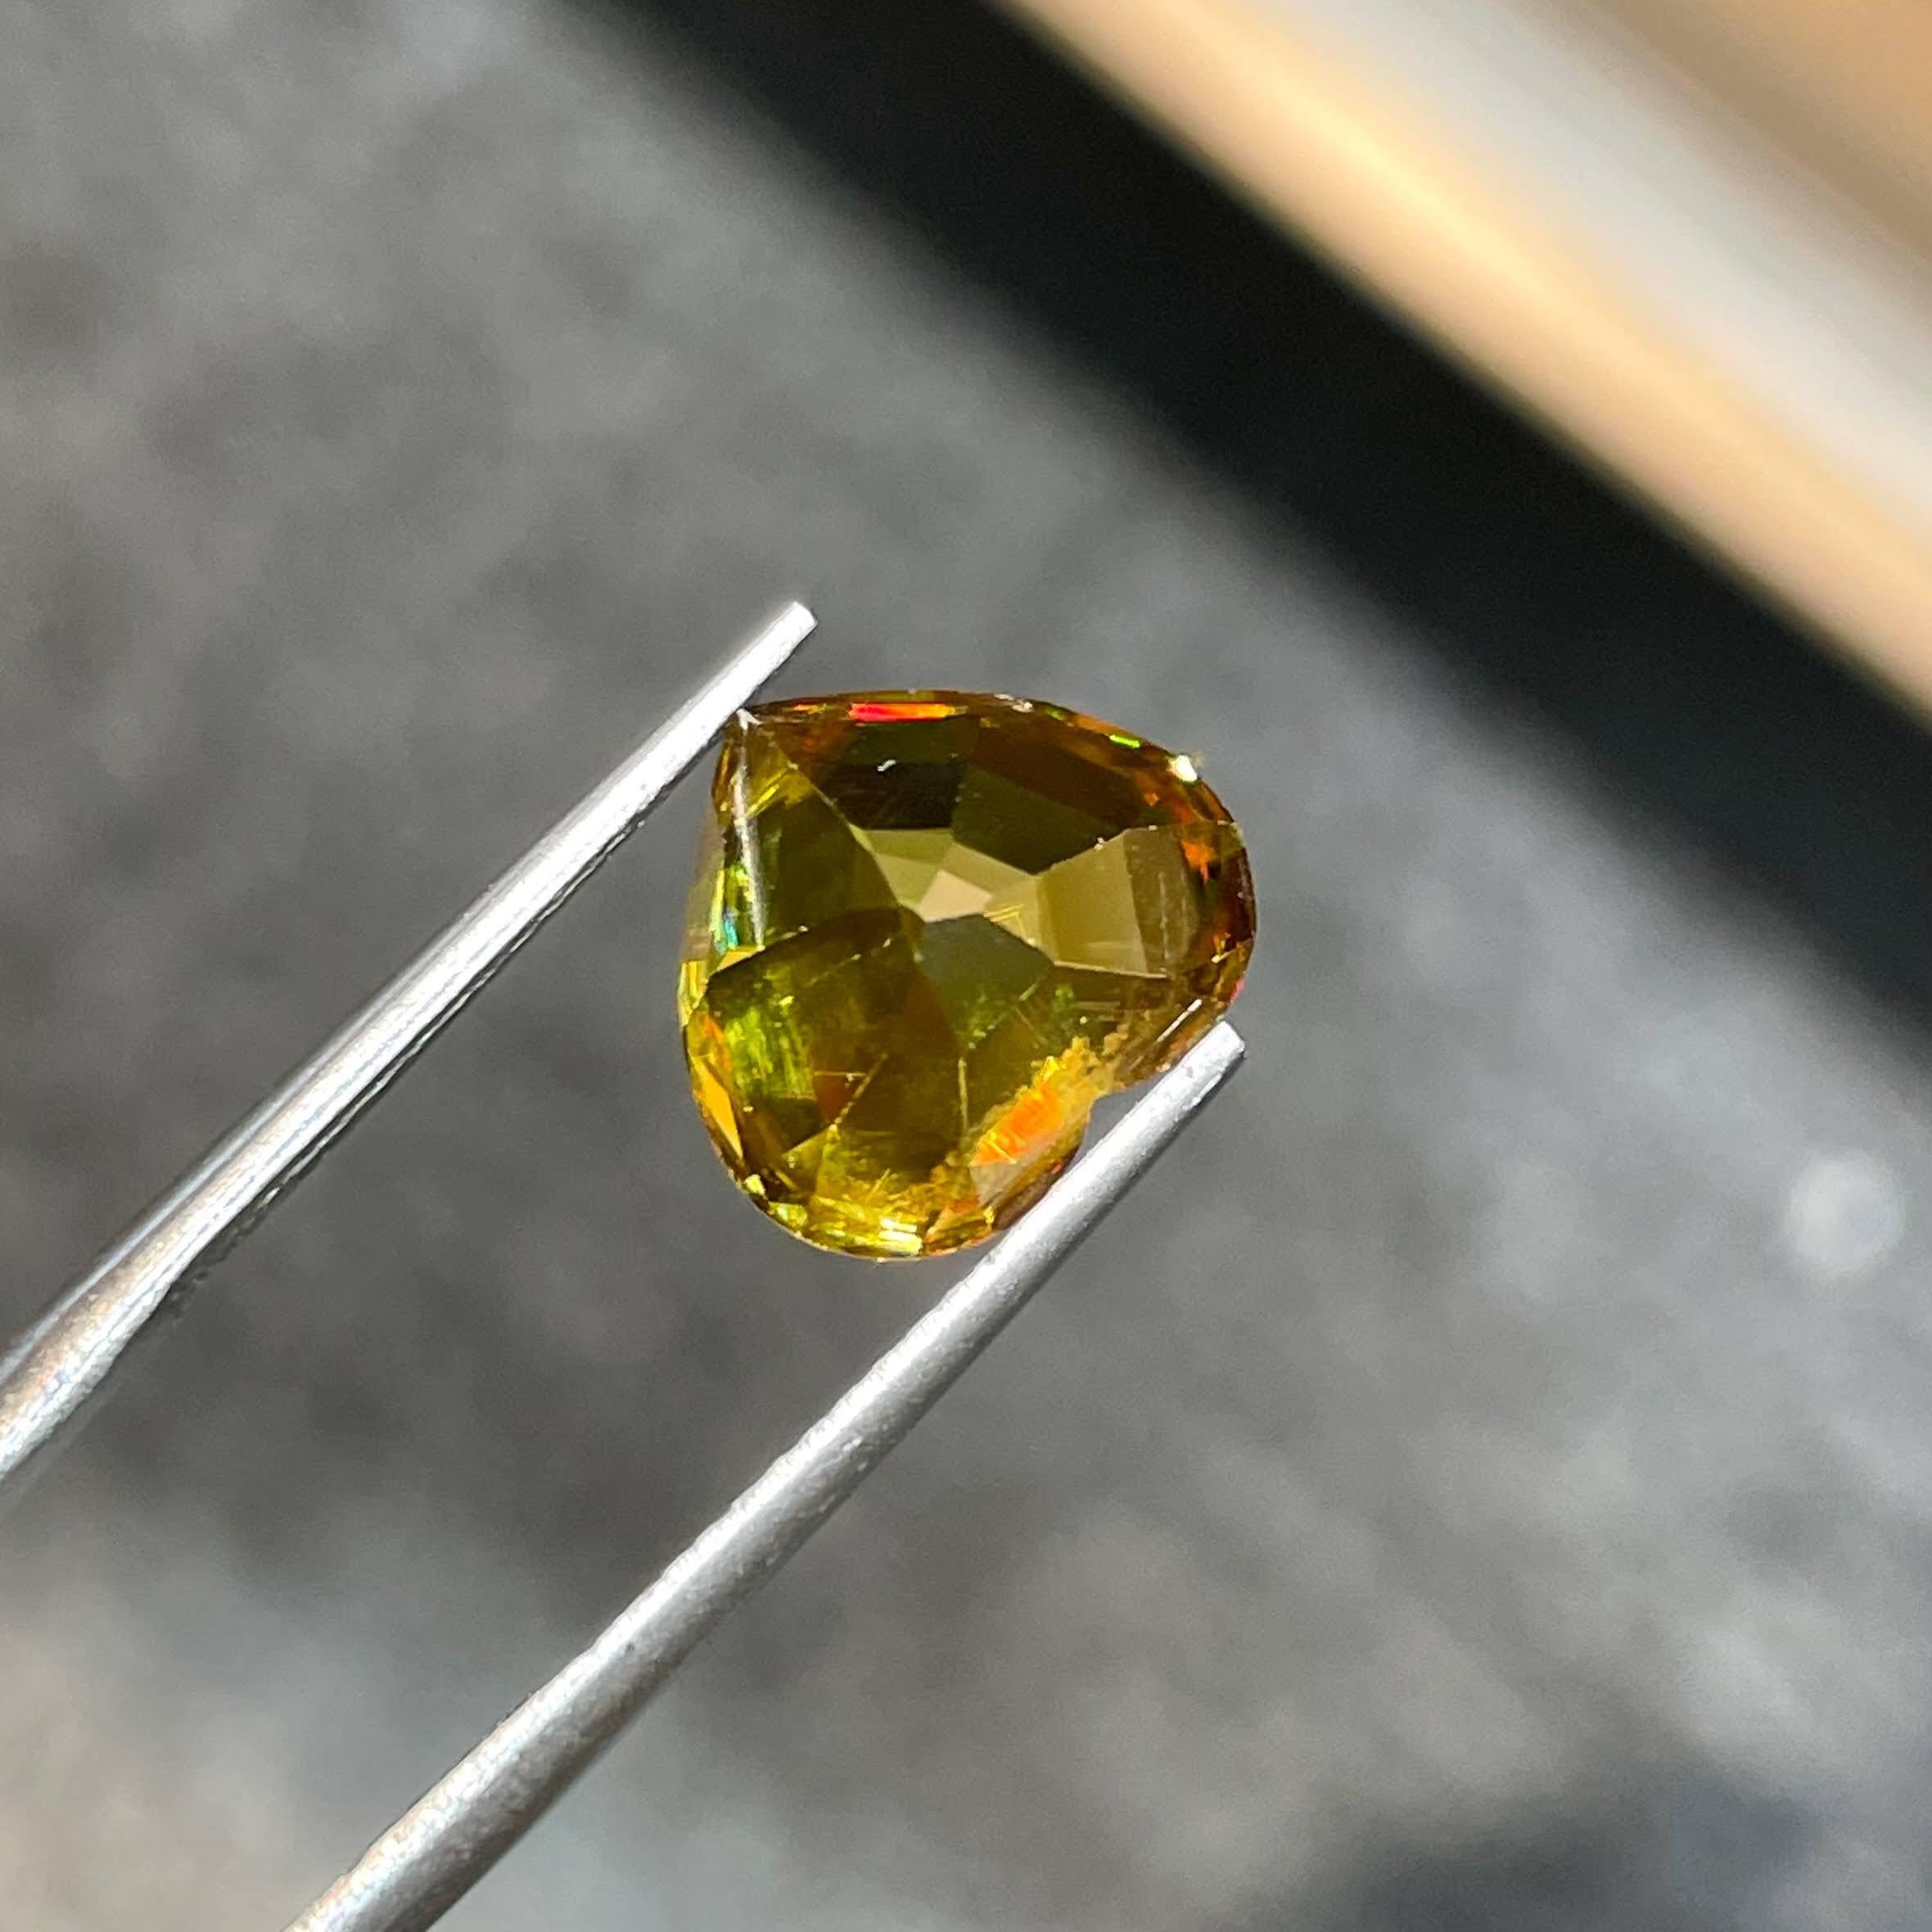 Weight 6.25 carats 
Dimensions 10.5x11.7x7.3 mm
Treatment none 
Origin Madagascar 
Clarity VVS (Very Very Slightly included)
Shape Heart 
Cut Heart




Behold the exquisite allure of a fine quality Sphene Stone, delicately fashioned into a heart